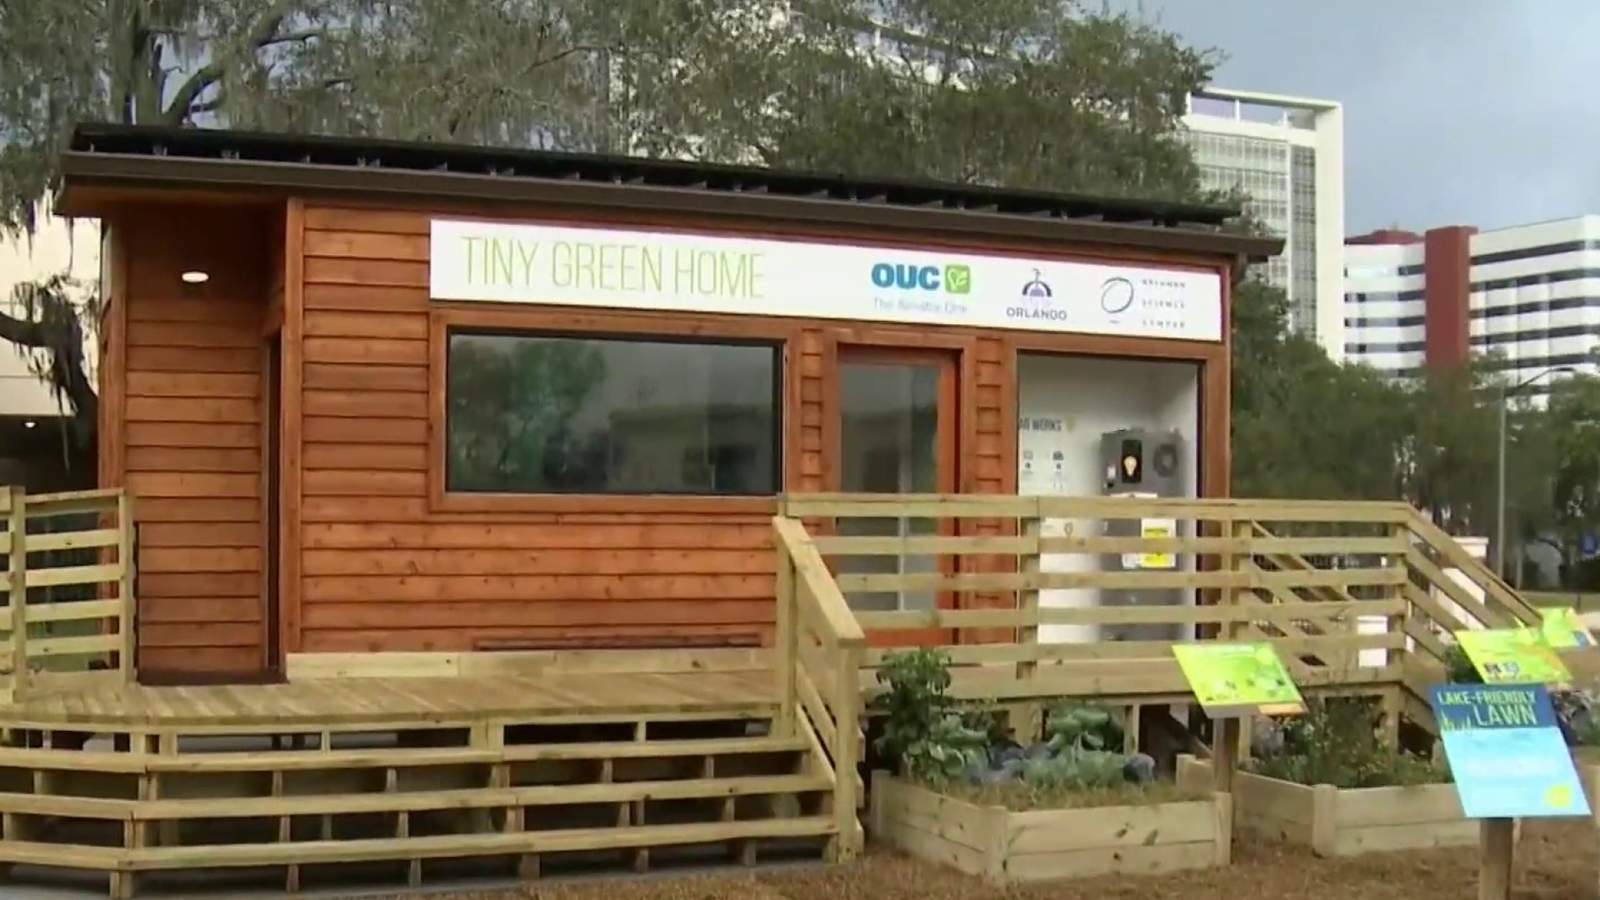 Tiny Green Home at Orlando Science Center offers hands-on experience